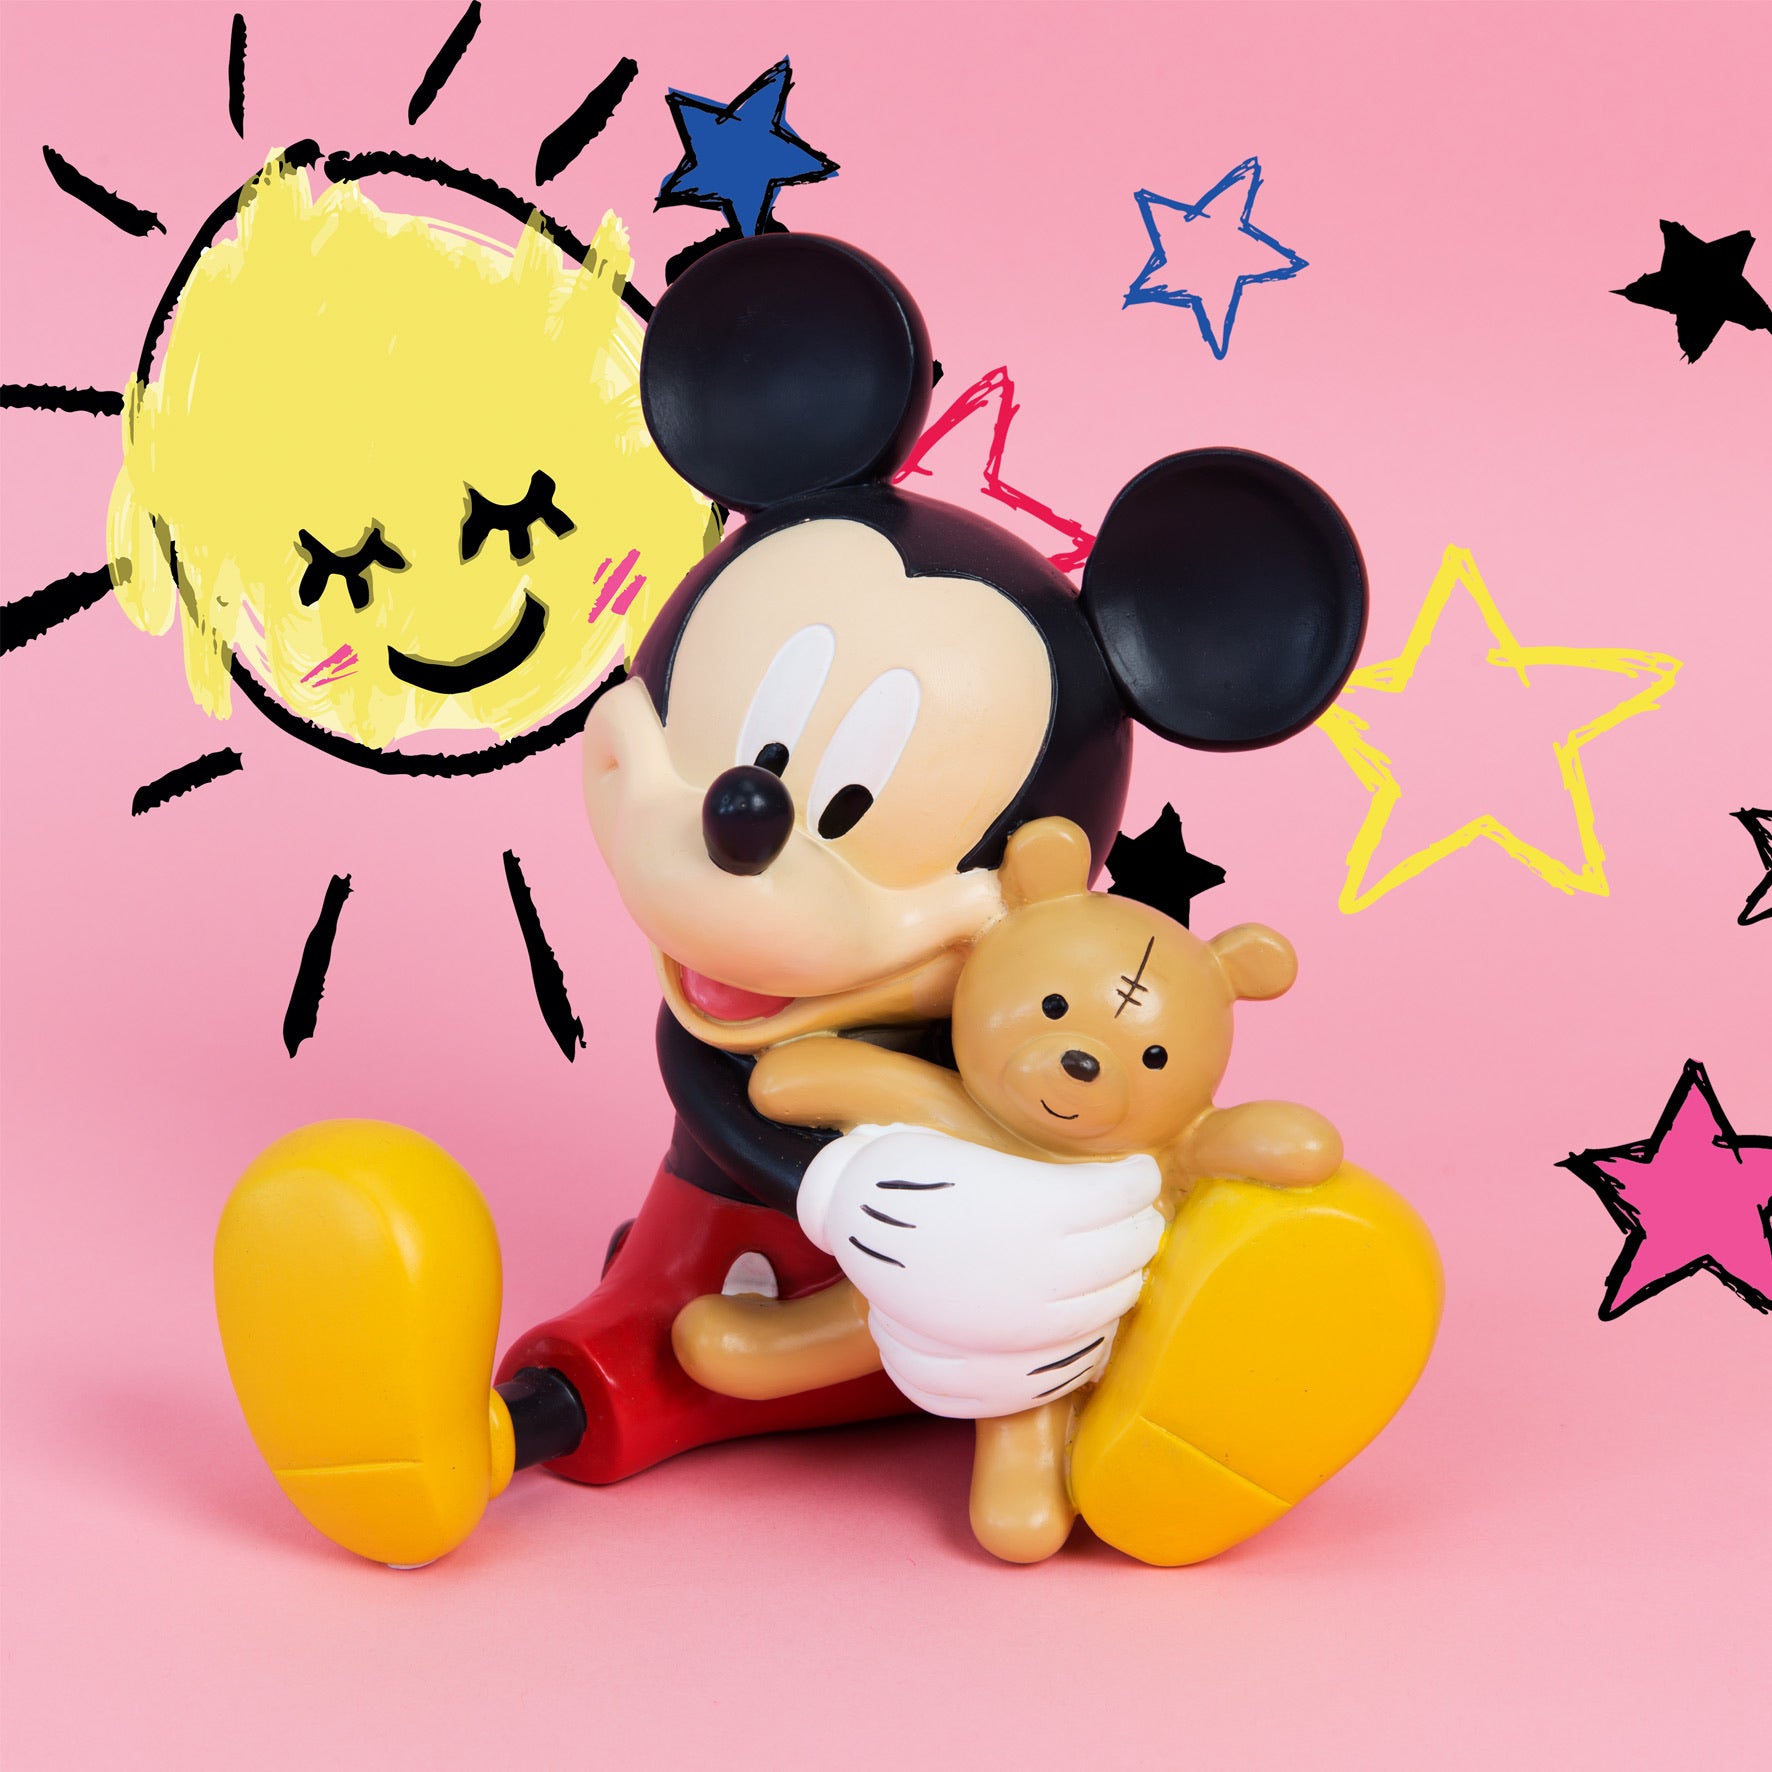 DISNEY MAGICAL BEGINNINGS MONEY BANK - MICKEY - Hallmark Jewellers Formby & The Jewellers Bench Widnes